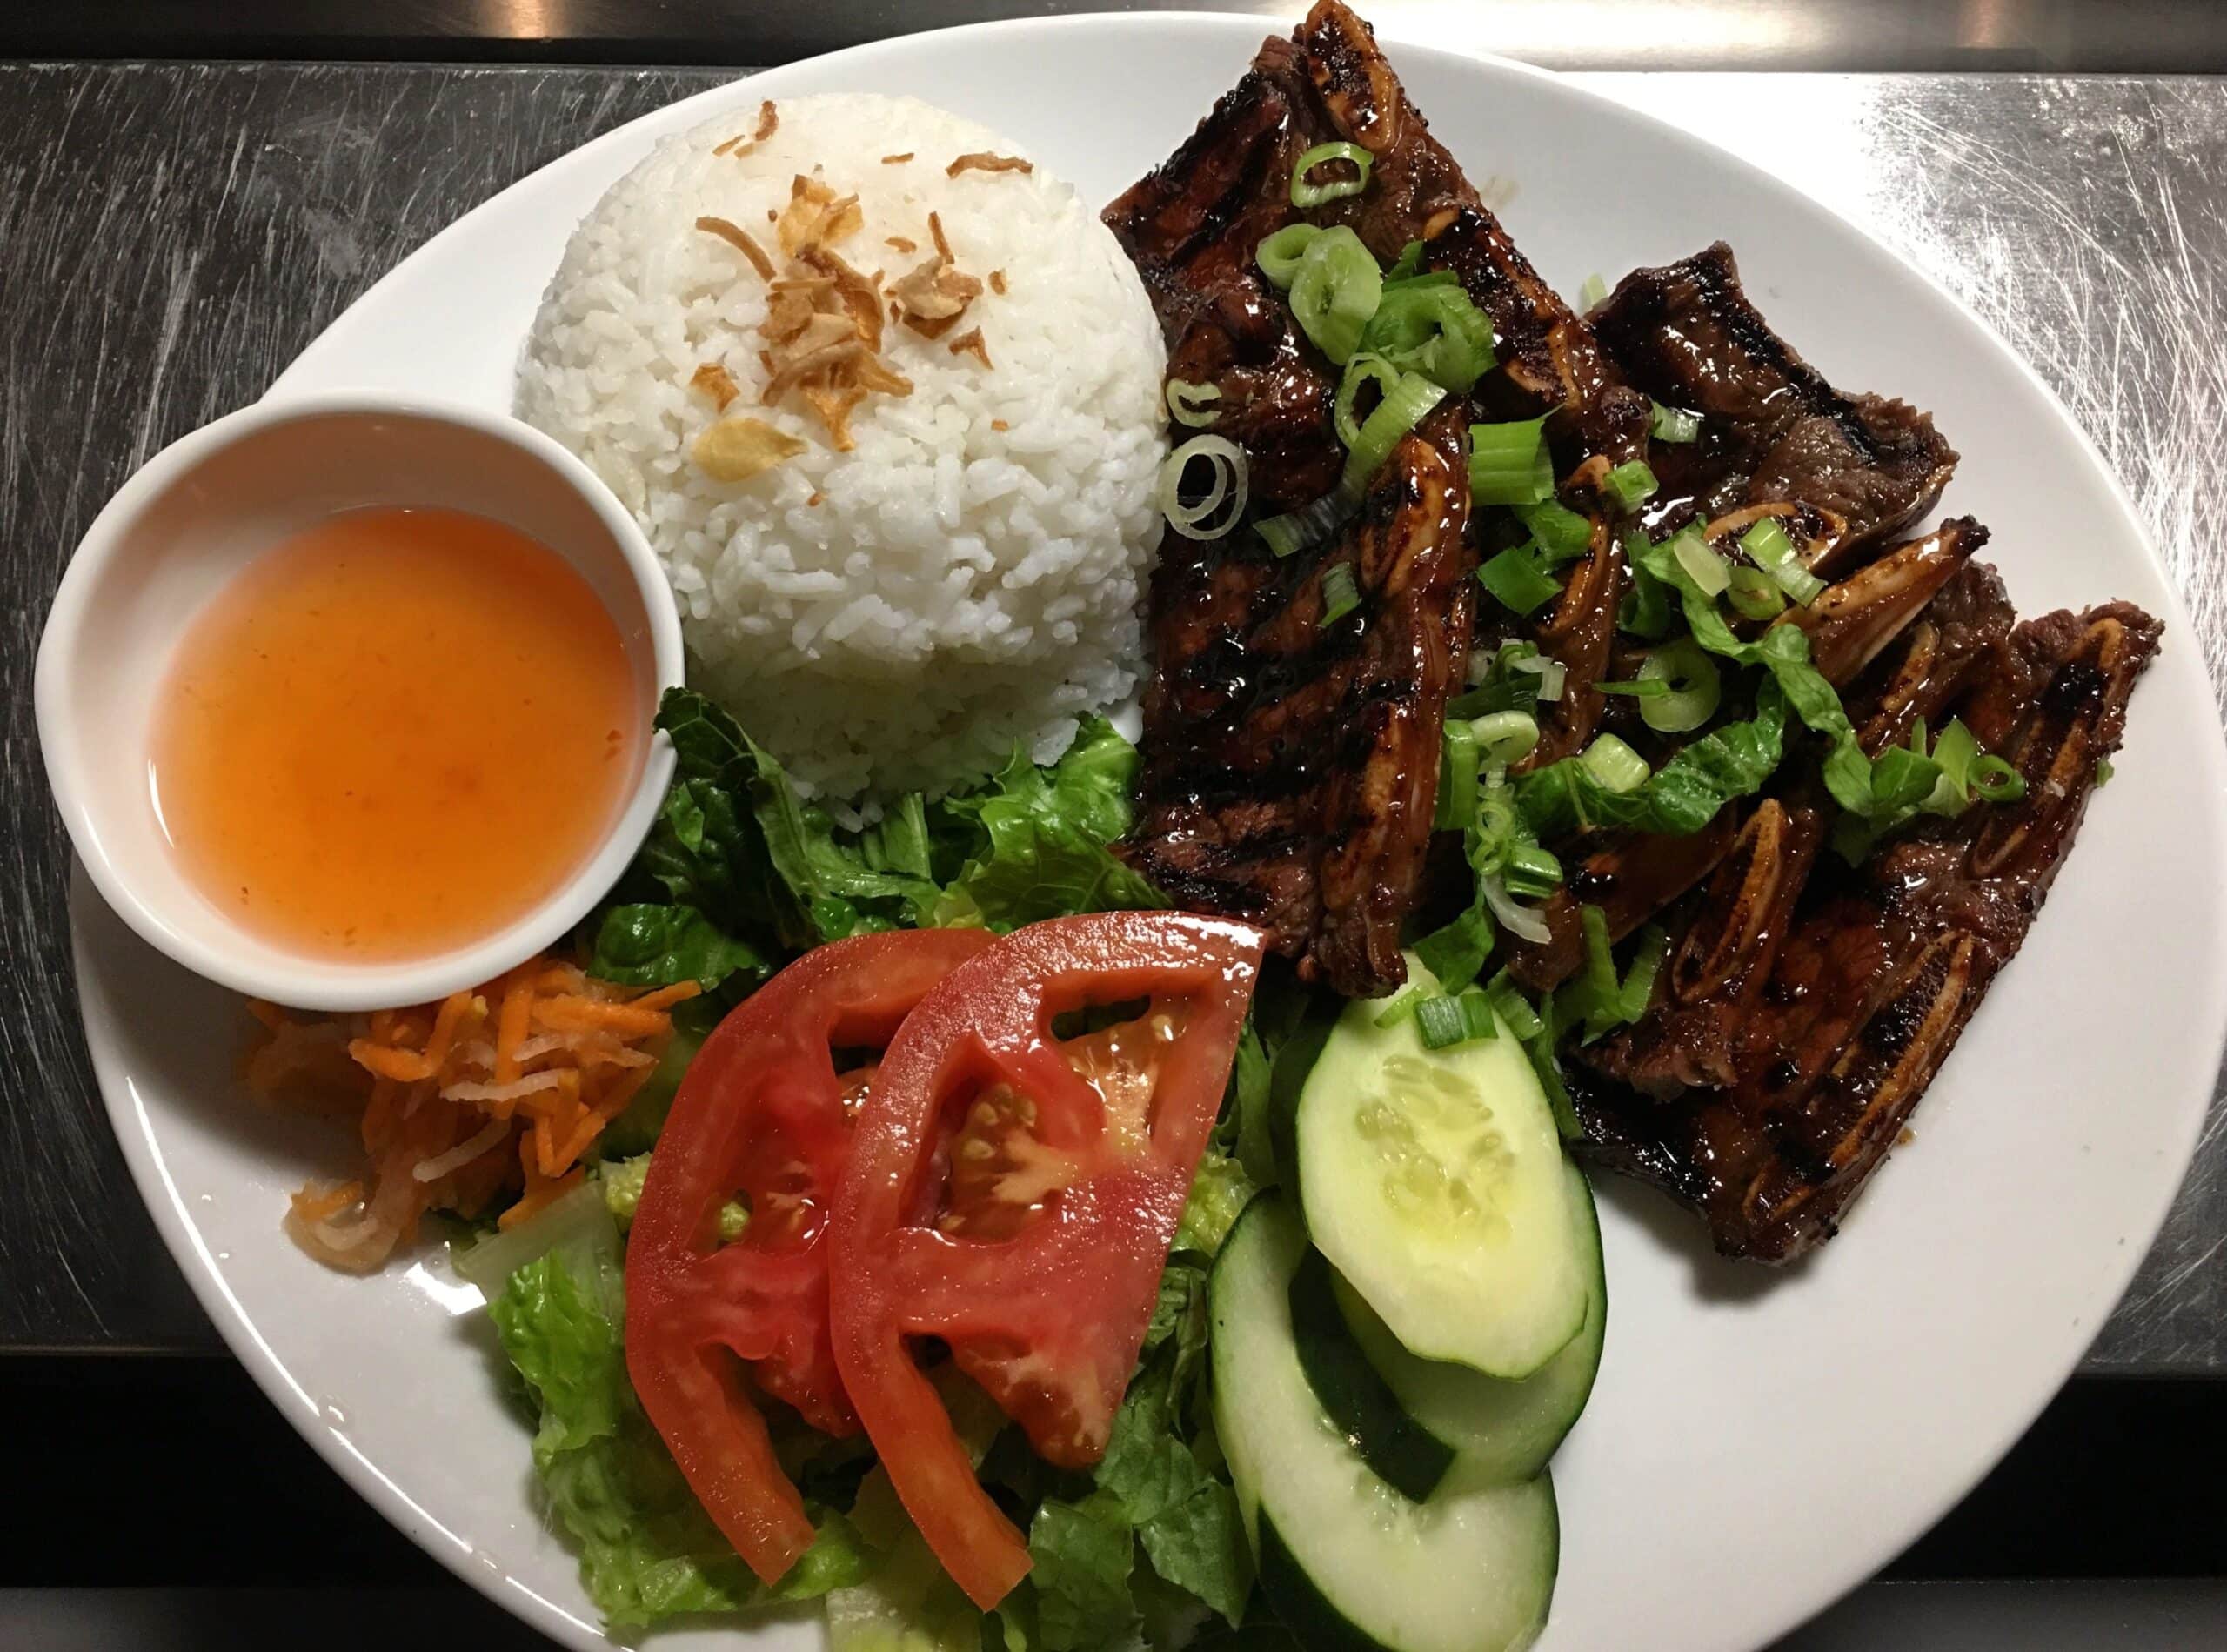 Grilled baby ribs, rice, and salad